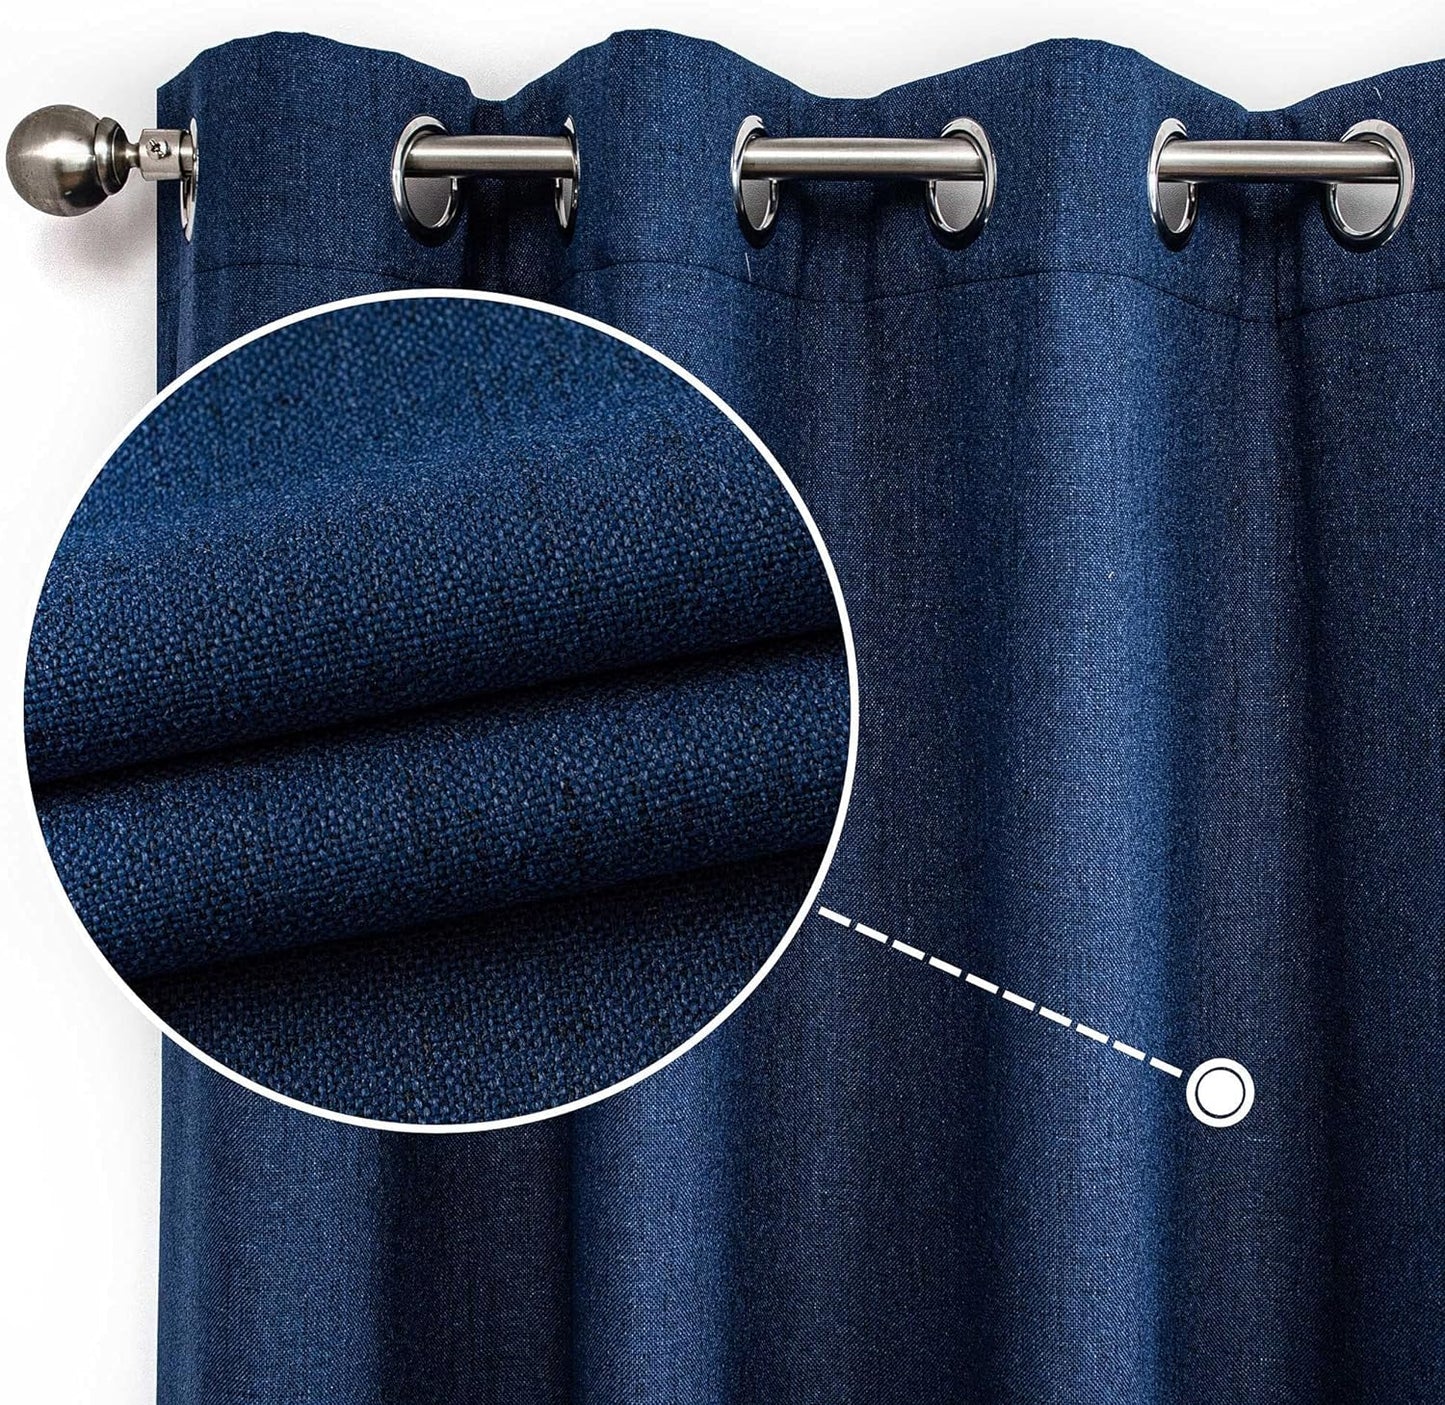 CUCRAF Full Blackout Window Curtains 84 Inches Long,Faux Linen Look Thermal Insulated Grommet Drapes Panels for Bedroom Living Room,Set of 2(52 X 84 Inches, Light Khaki)  CUCRAF Navy Blue 52 X 63 Inches 